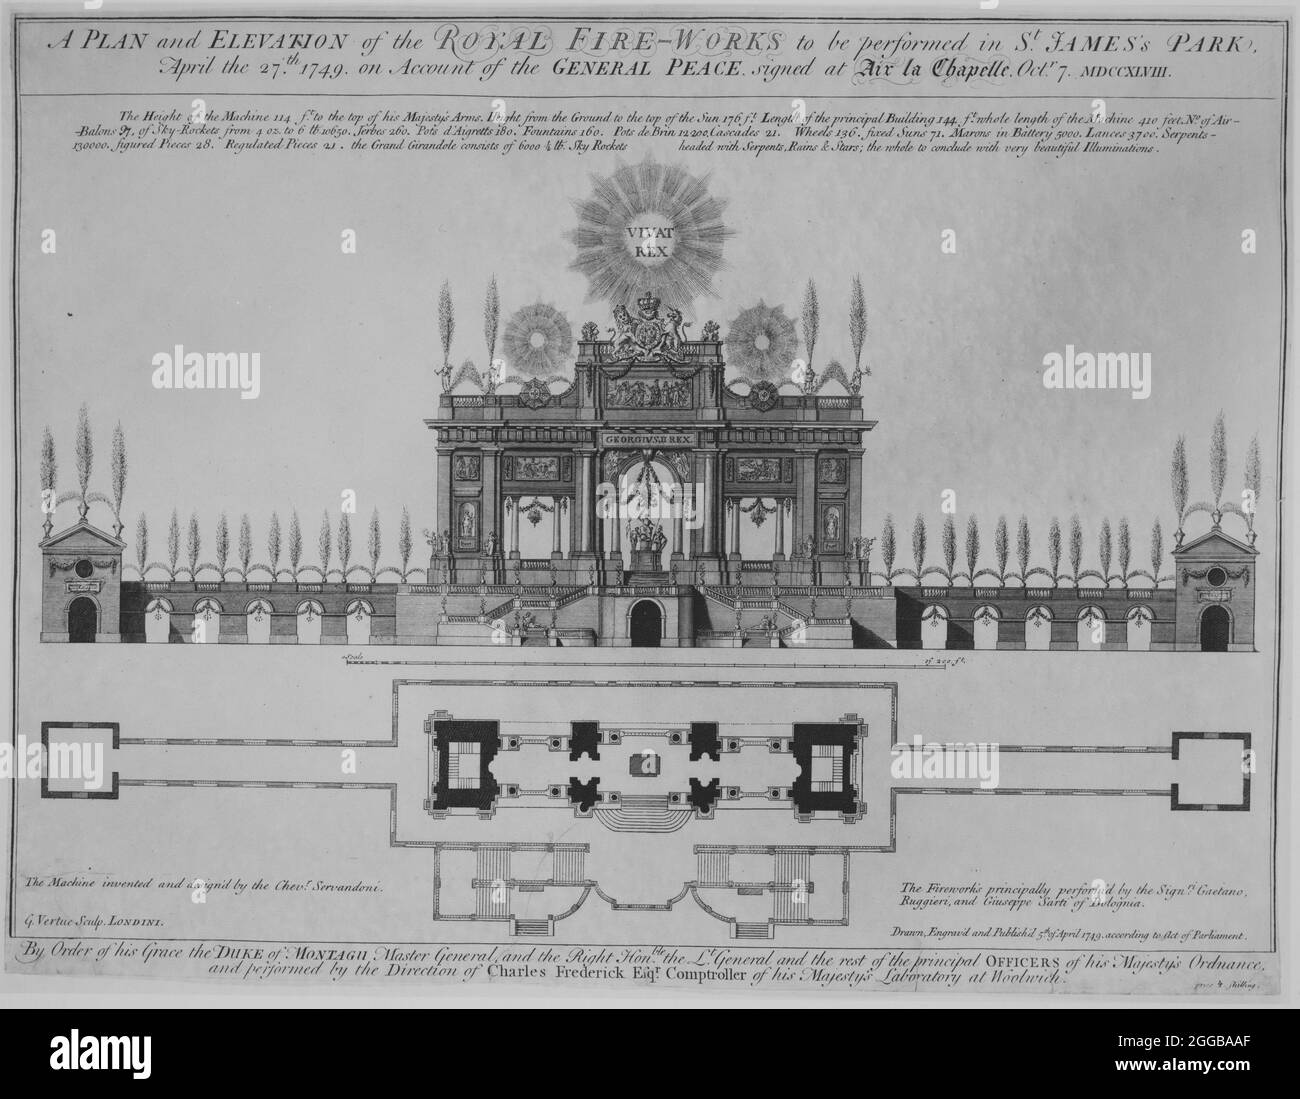 Peace of Aix-la-Chapelle: A Plan and Elevation of the Royal Fire-Works, London, 1749, ca. 1749. A fireworks display, with music specially composed by Handel, was held in St James' Park, London, to celebrate the end of the War of the Austrian Succession and the signing of the Treaty of Aix-la-Chapelle. Stock Photo